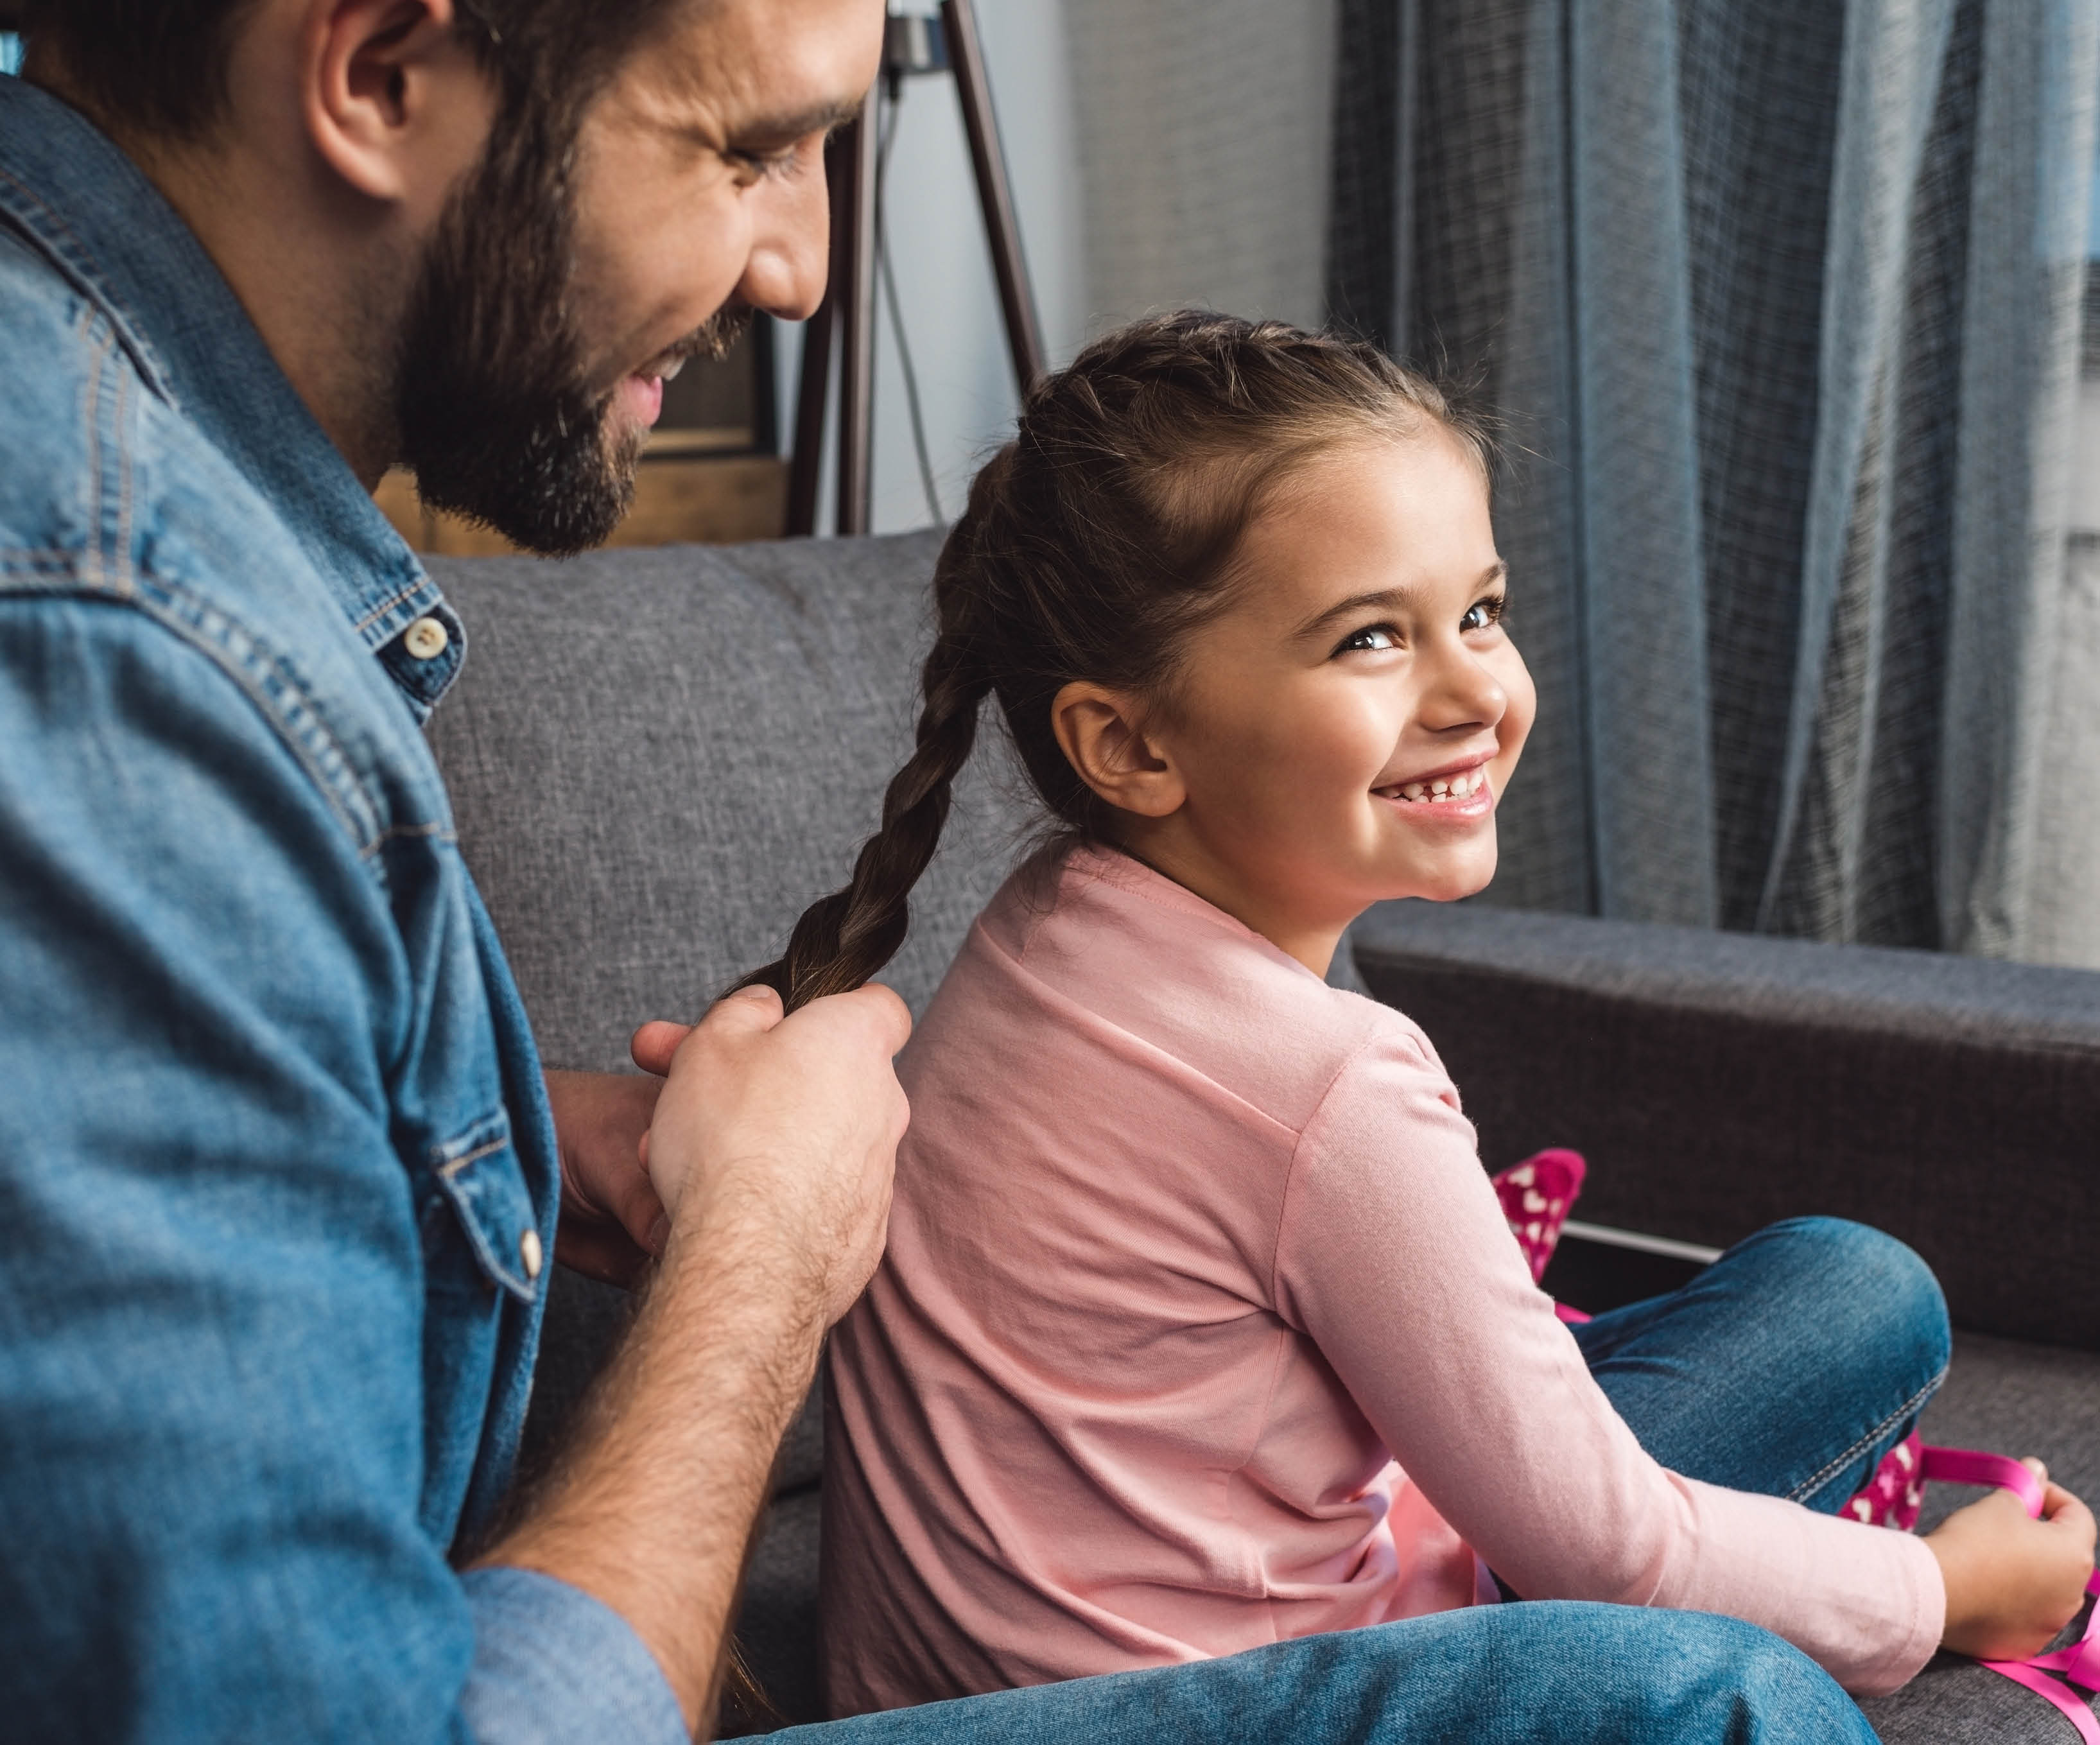 Dads - master the art of styling your daughter’s hair at this hands-on workshop at Cronulla Library! Book your free tickets today.